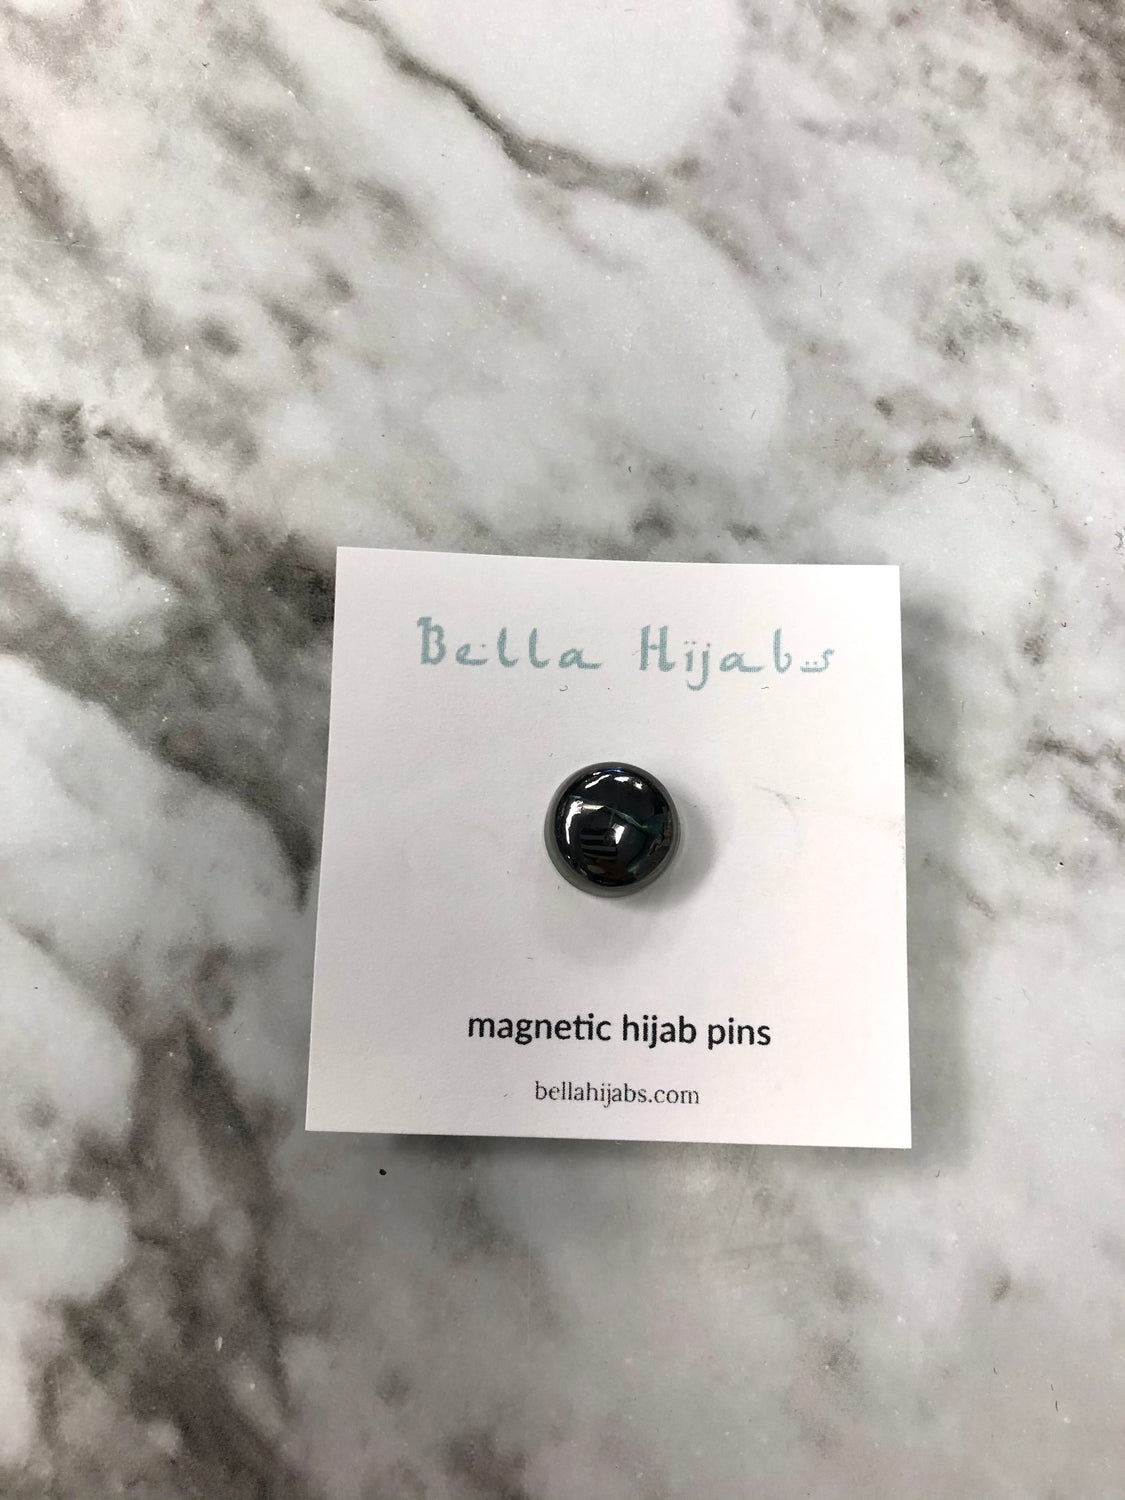 magnet hijab pin in glossy black